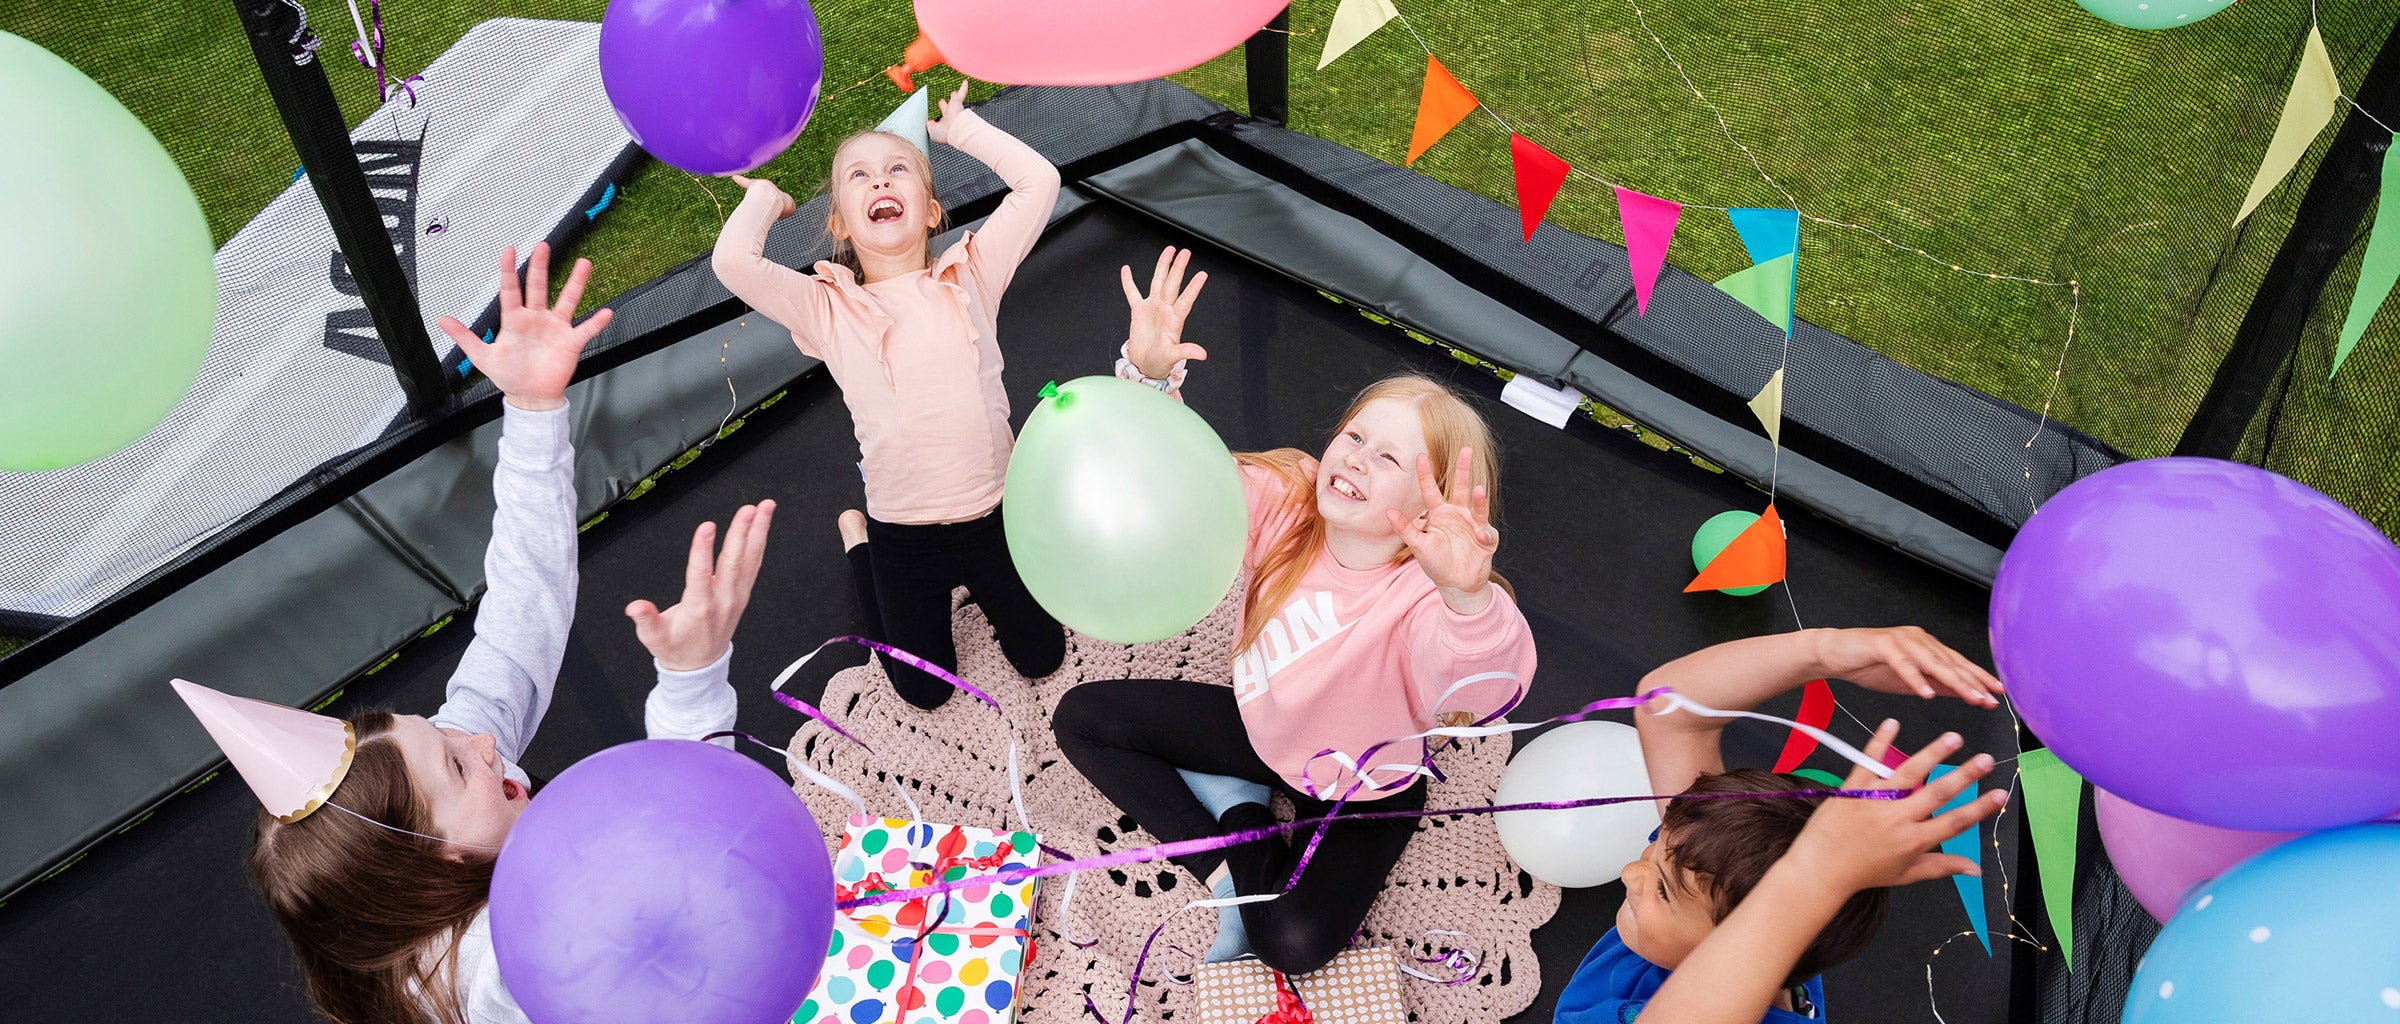 Four kids having a party on a decorated trampoline.